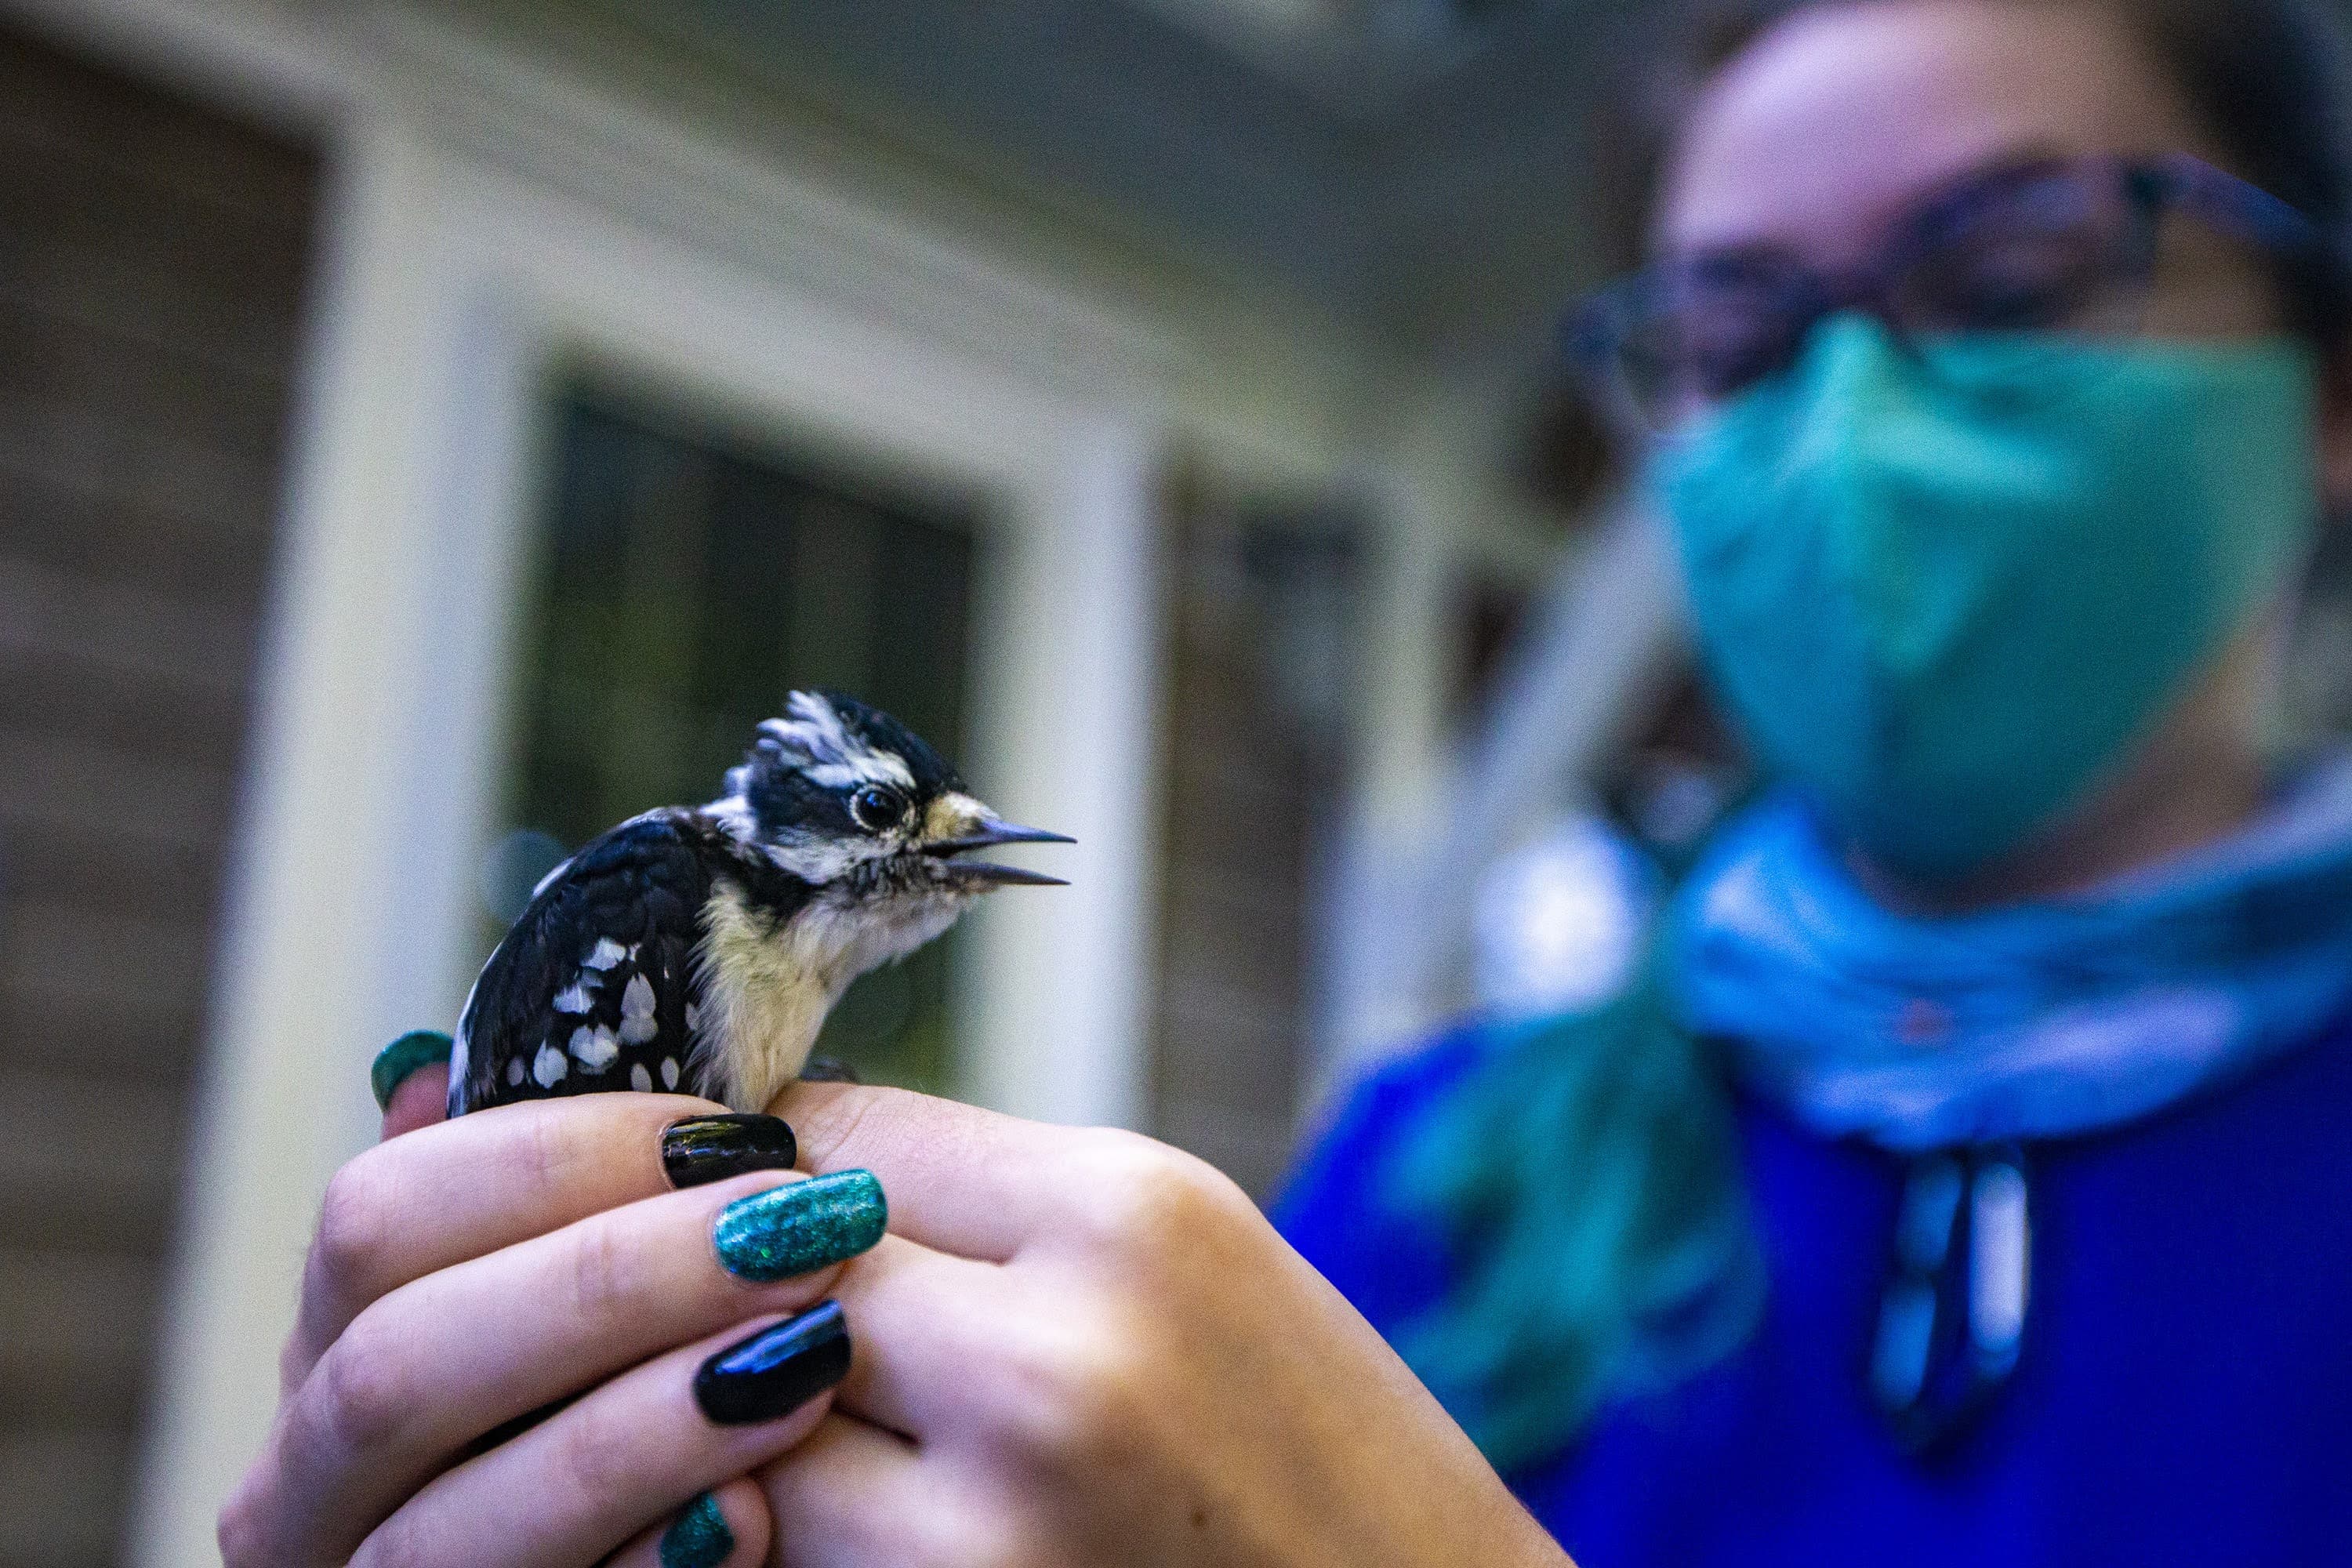 Manomet bird bander Amy Hogan holds a young downy woodpecker to prepare to set it free. (Jesse Costa/WBUR)